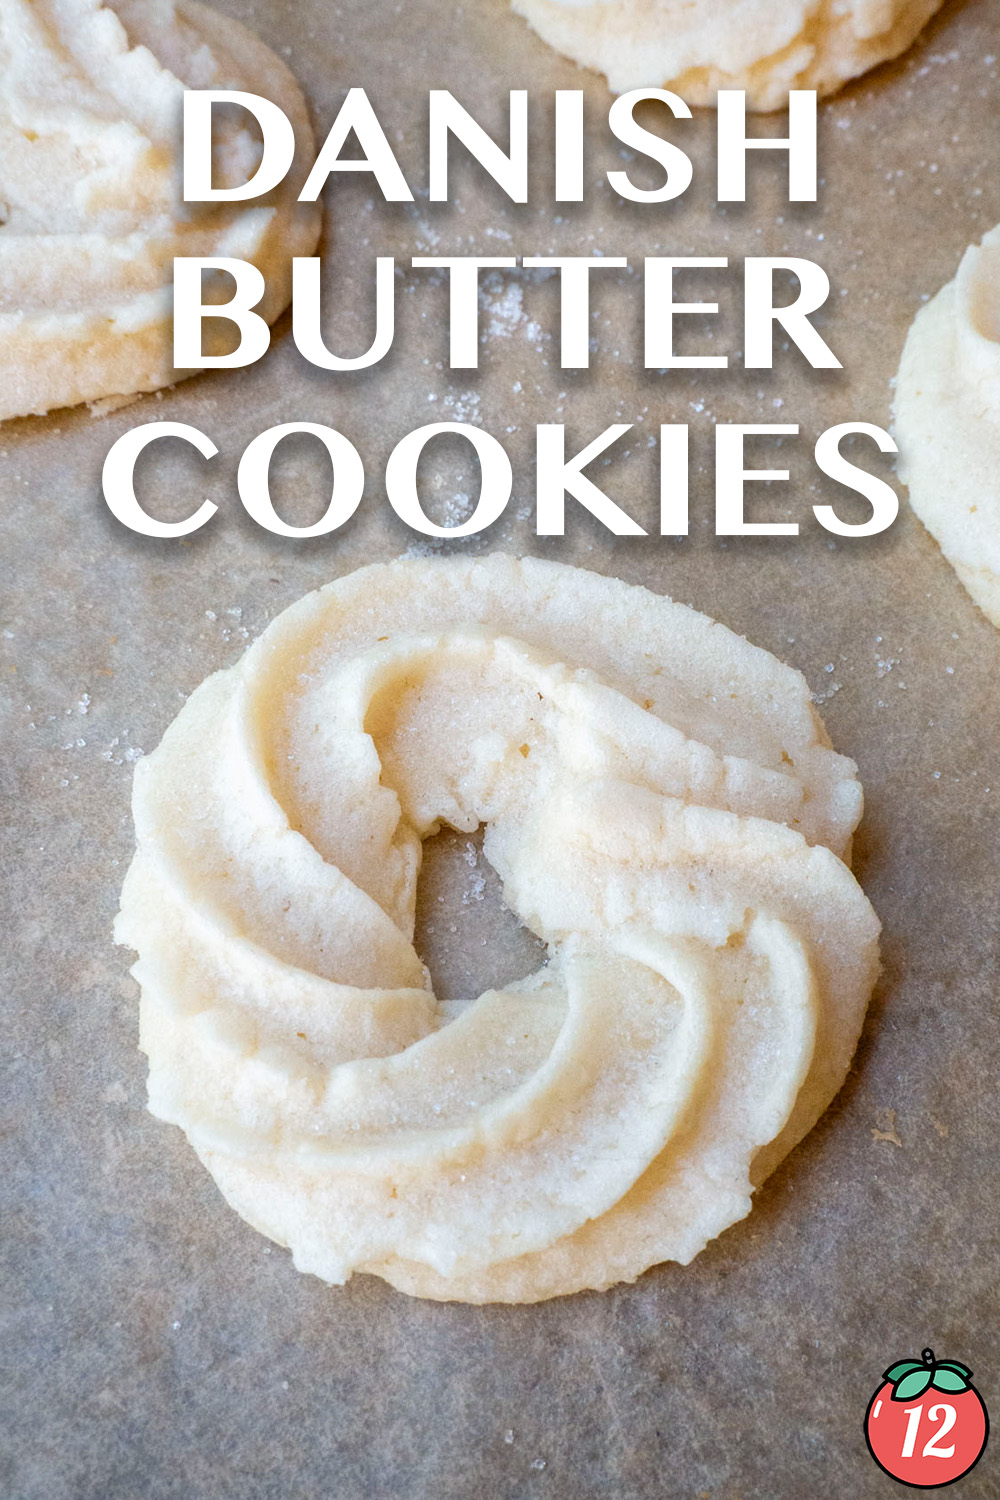 How to make Danish butter cookies (Recipe) - Rice 'n Flour